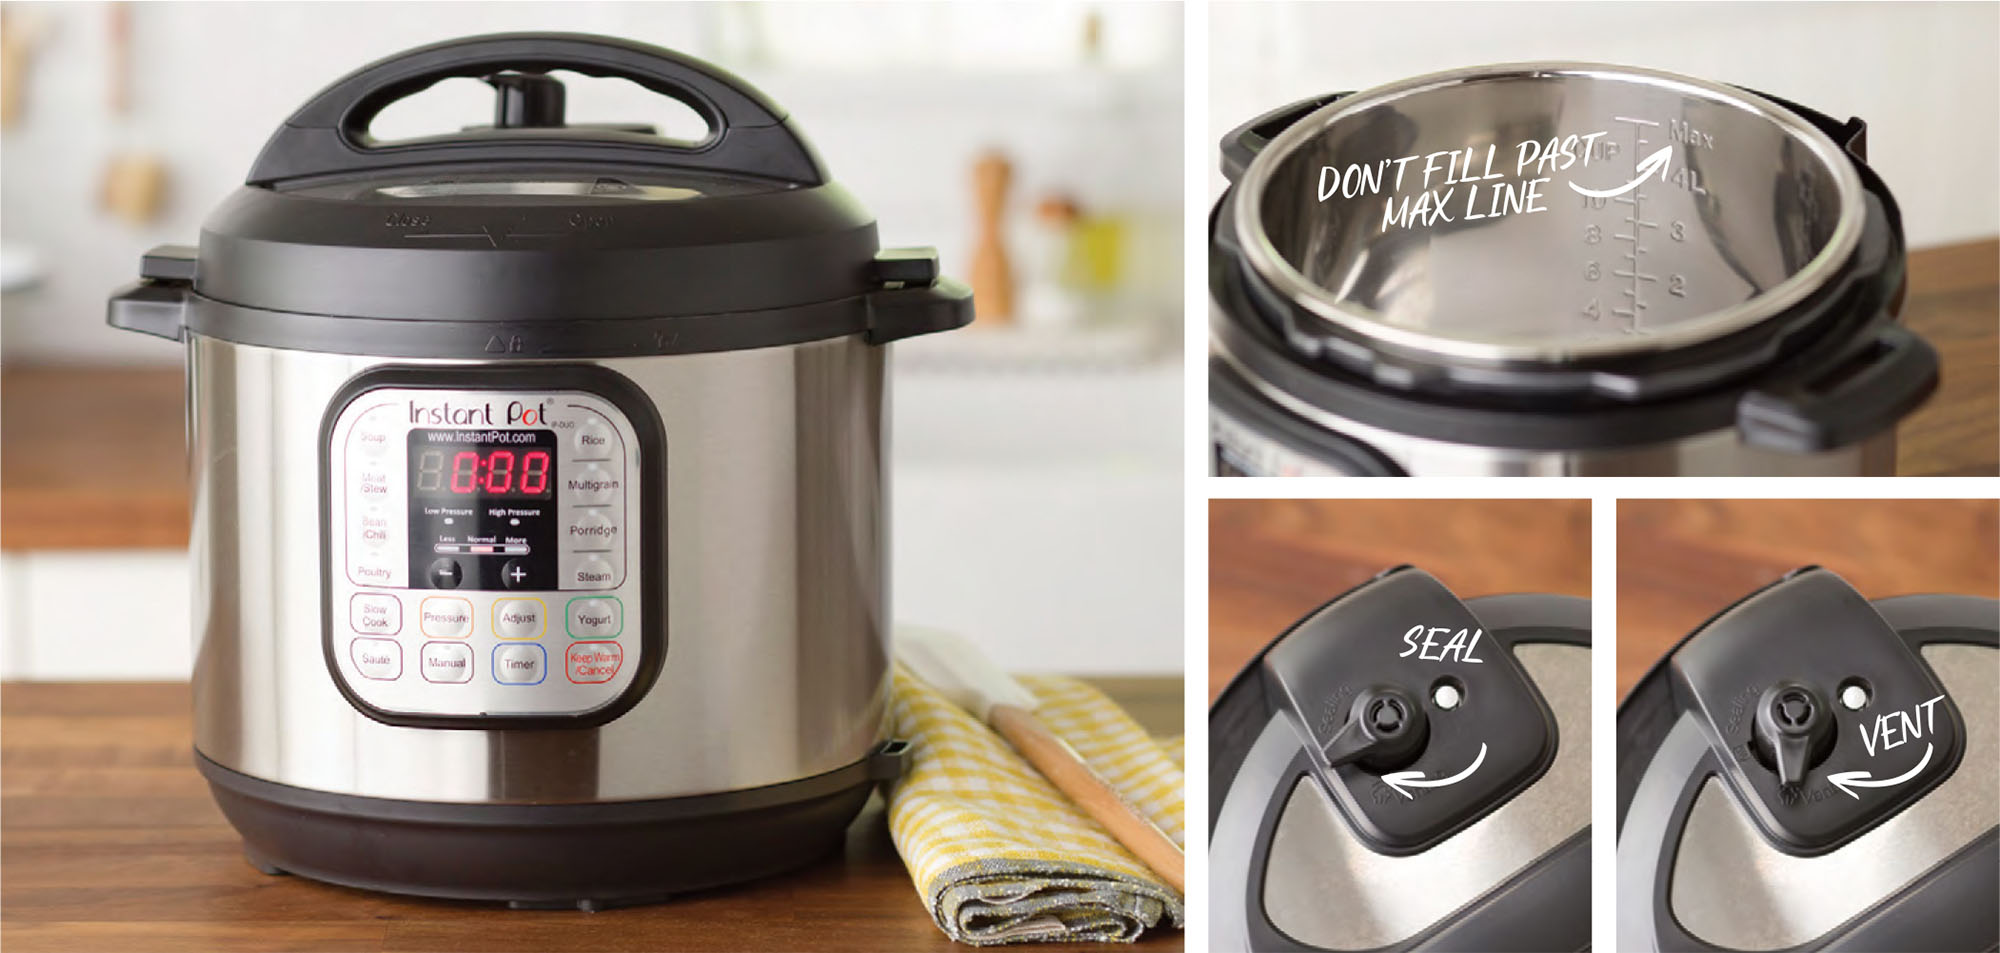 PRESSURE COOKER TIPS Using a multipurpose cooker requires some reading and - photo 6